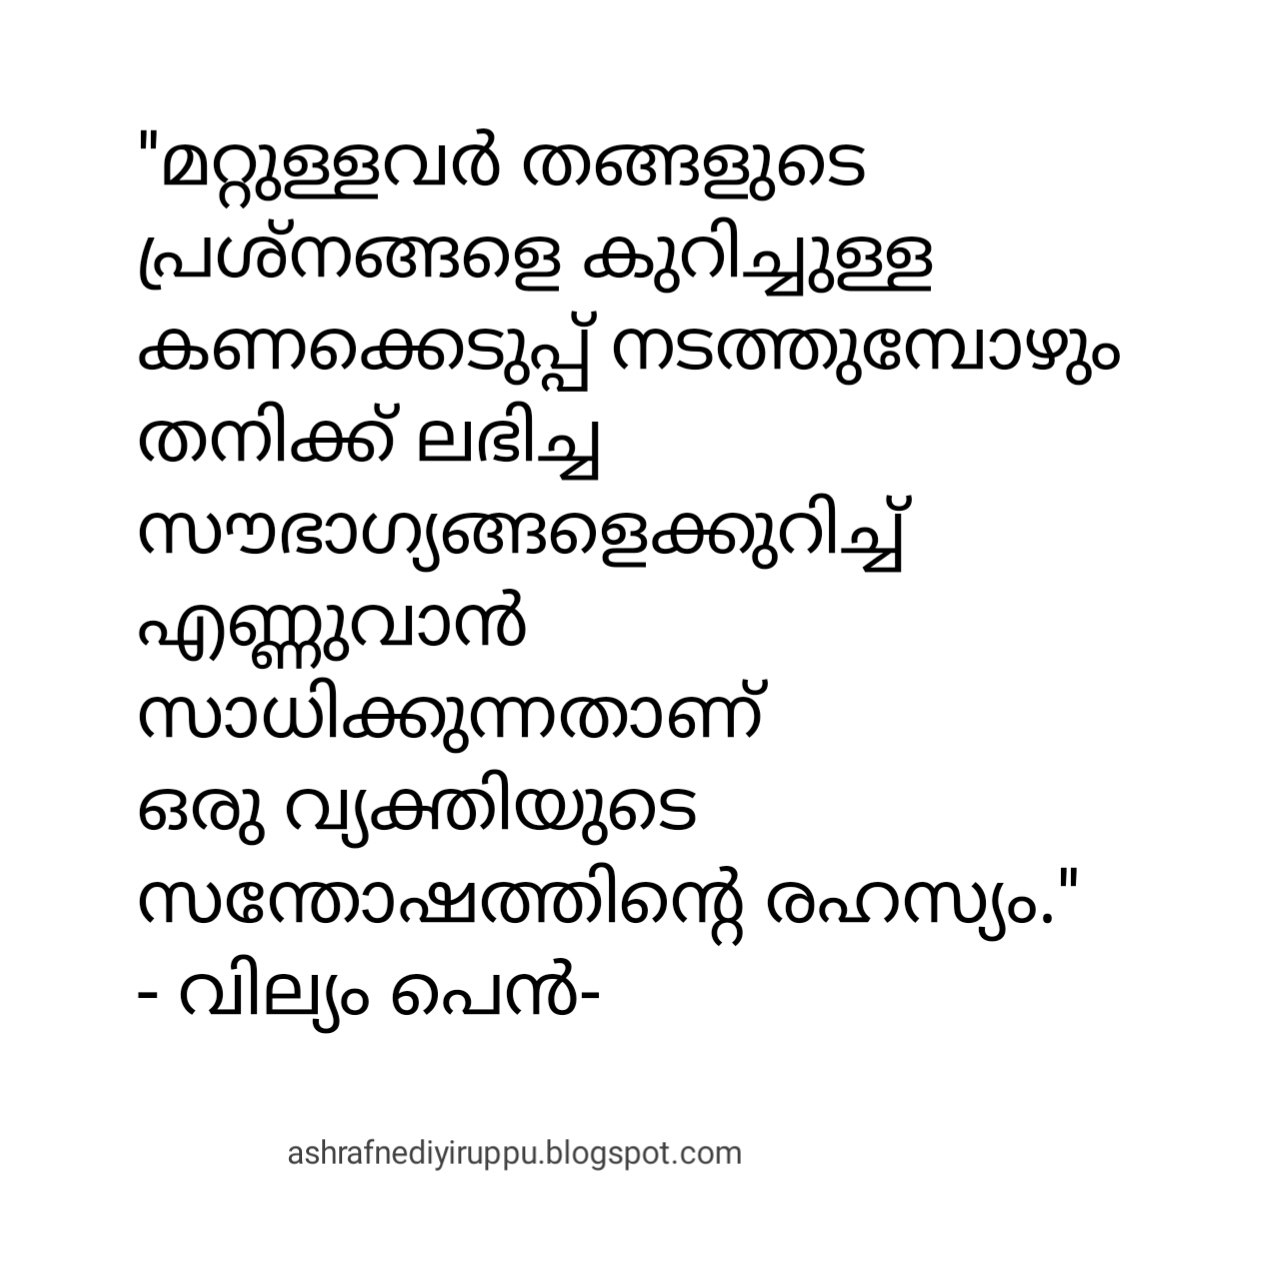 Positive Life Quotes Malayalam June 2017